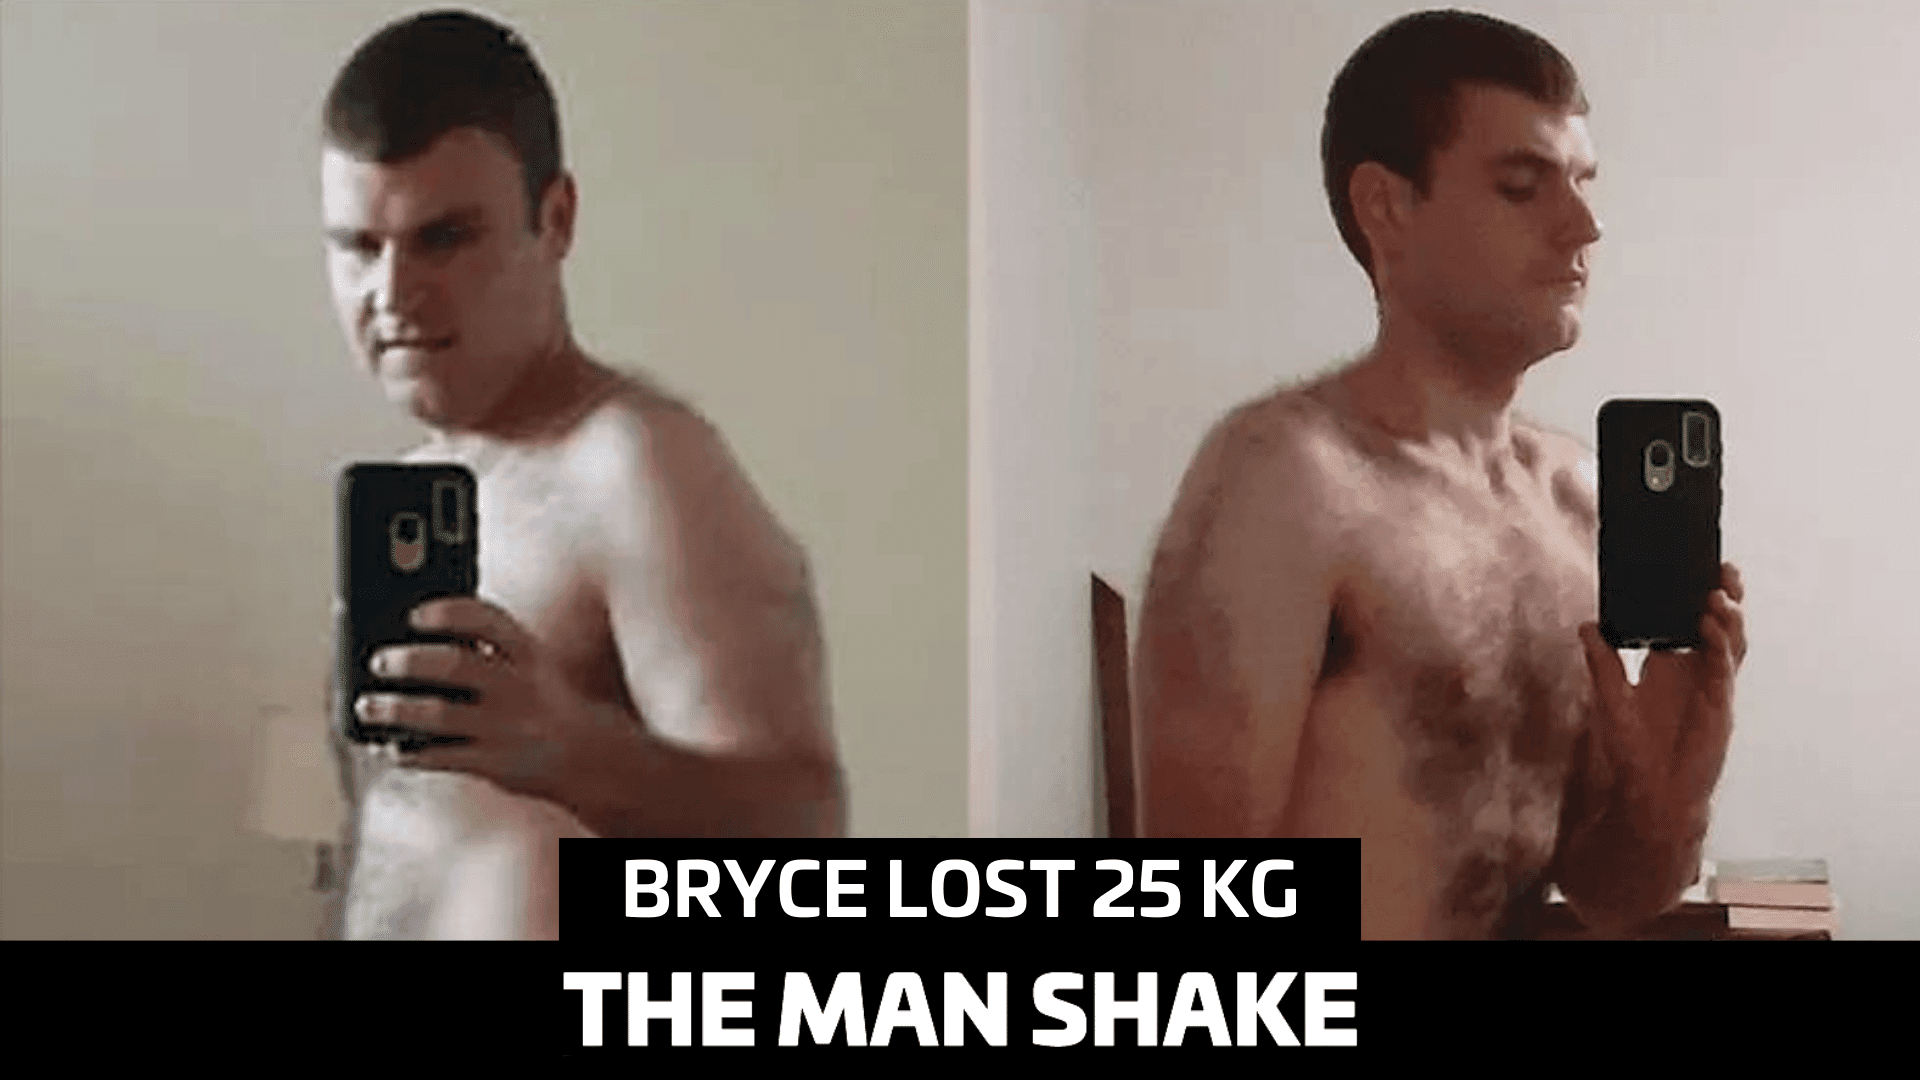 Bryce lost 25.1kg and gained his confidence.